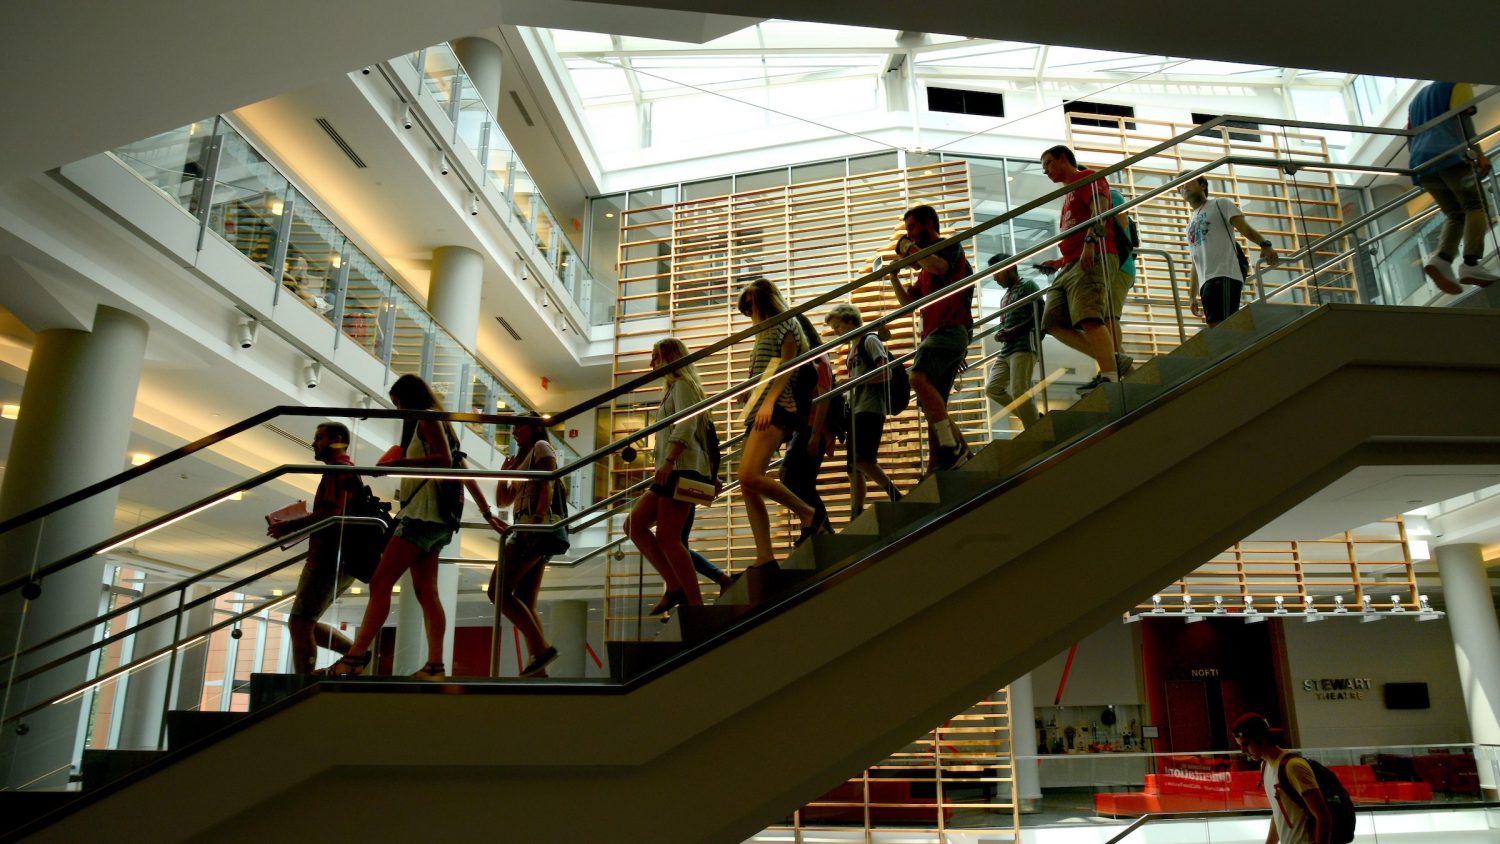 New students walk through Talley Student Union during orientation.